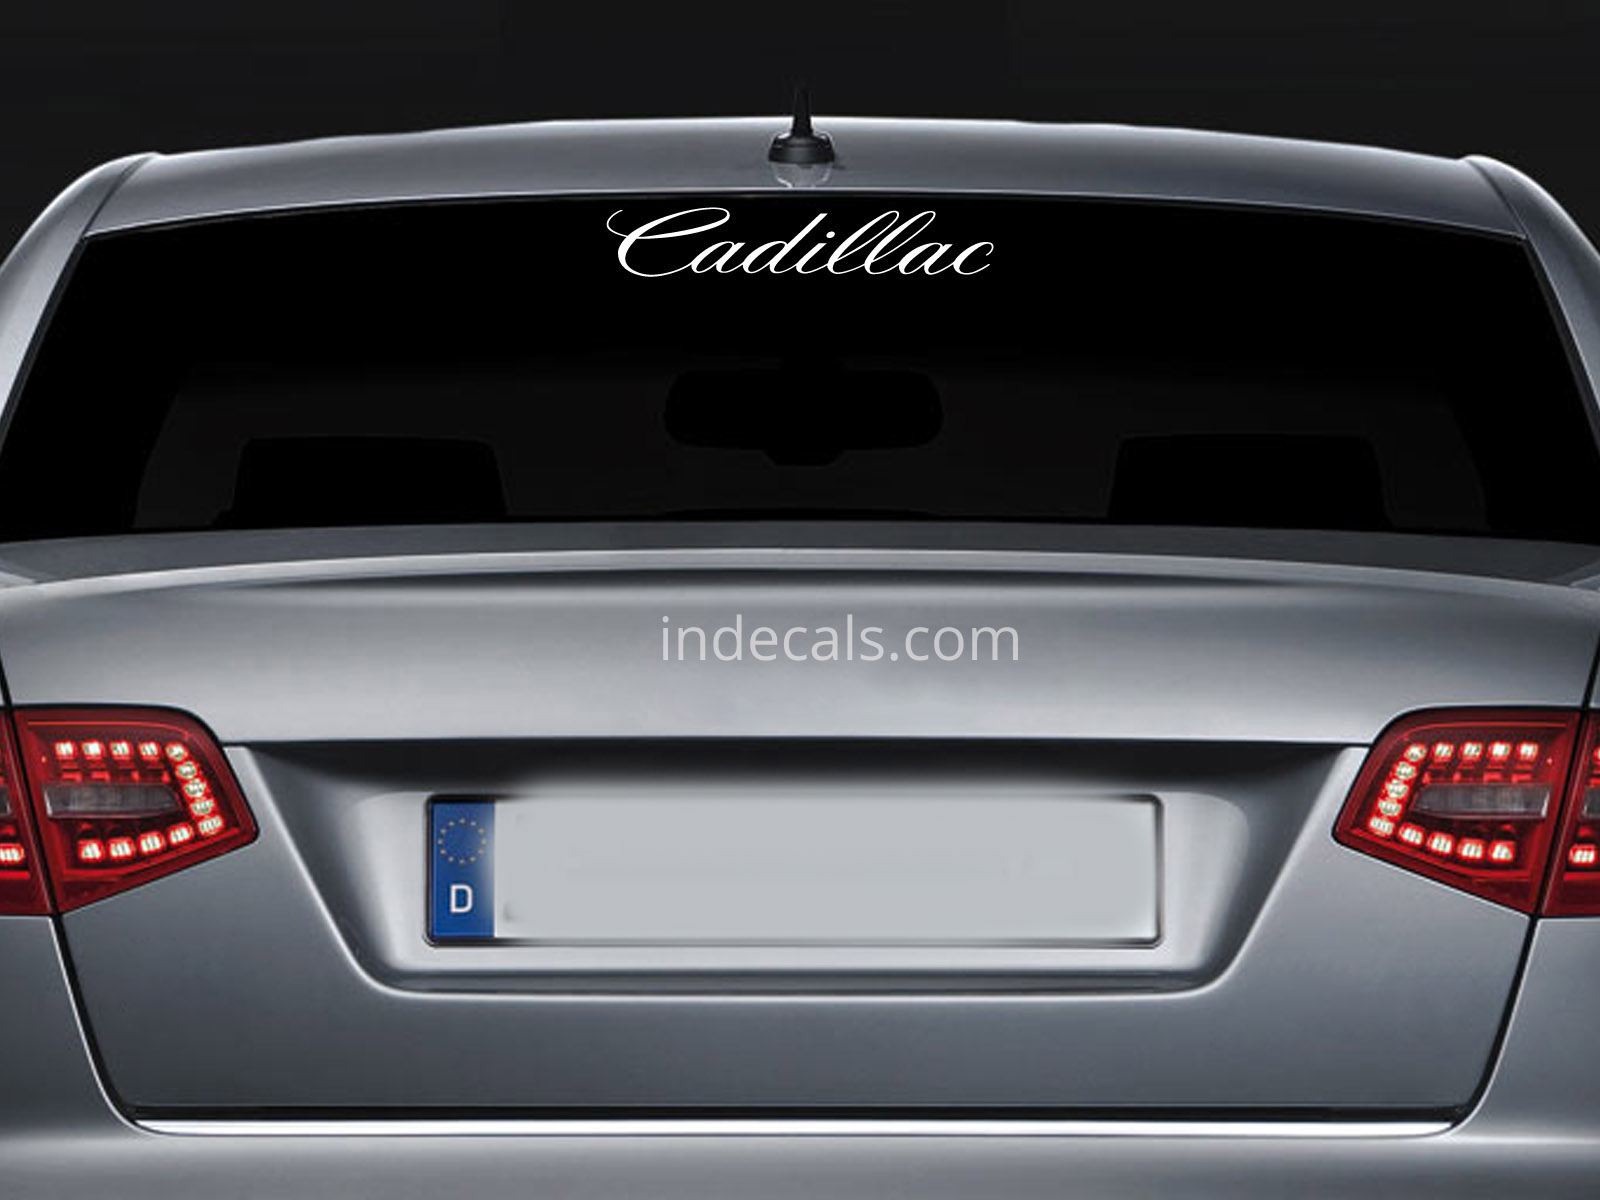 1 x Cadillac Sticker for Windshield or Back Window - White